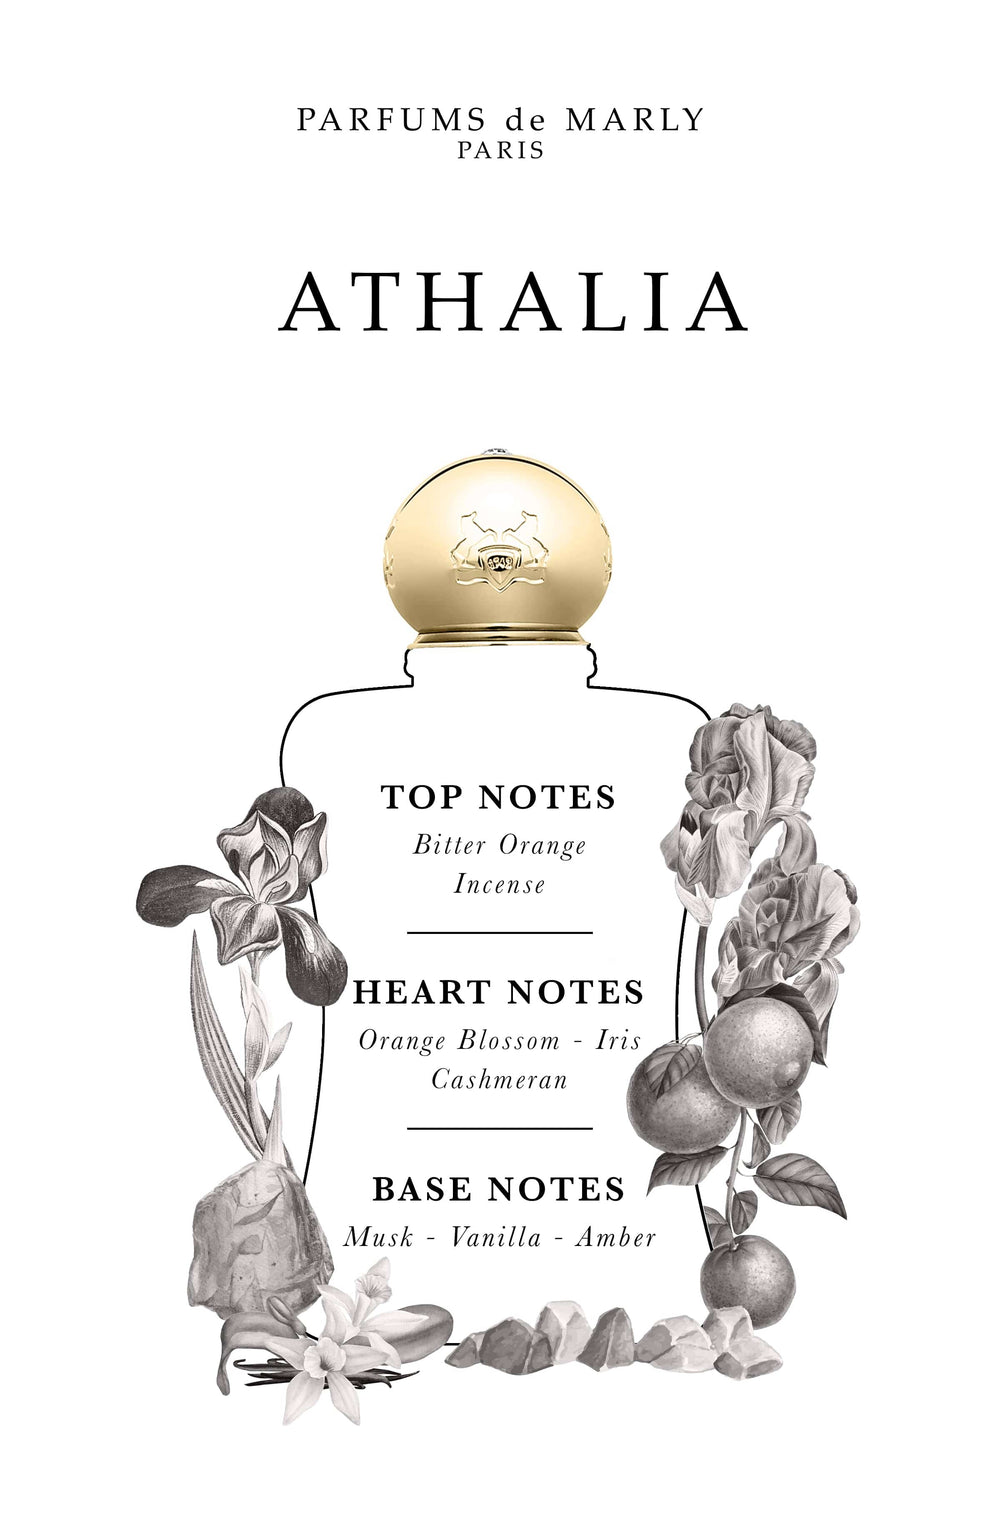 Athalia by Parfums De Marly